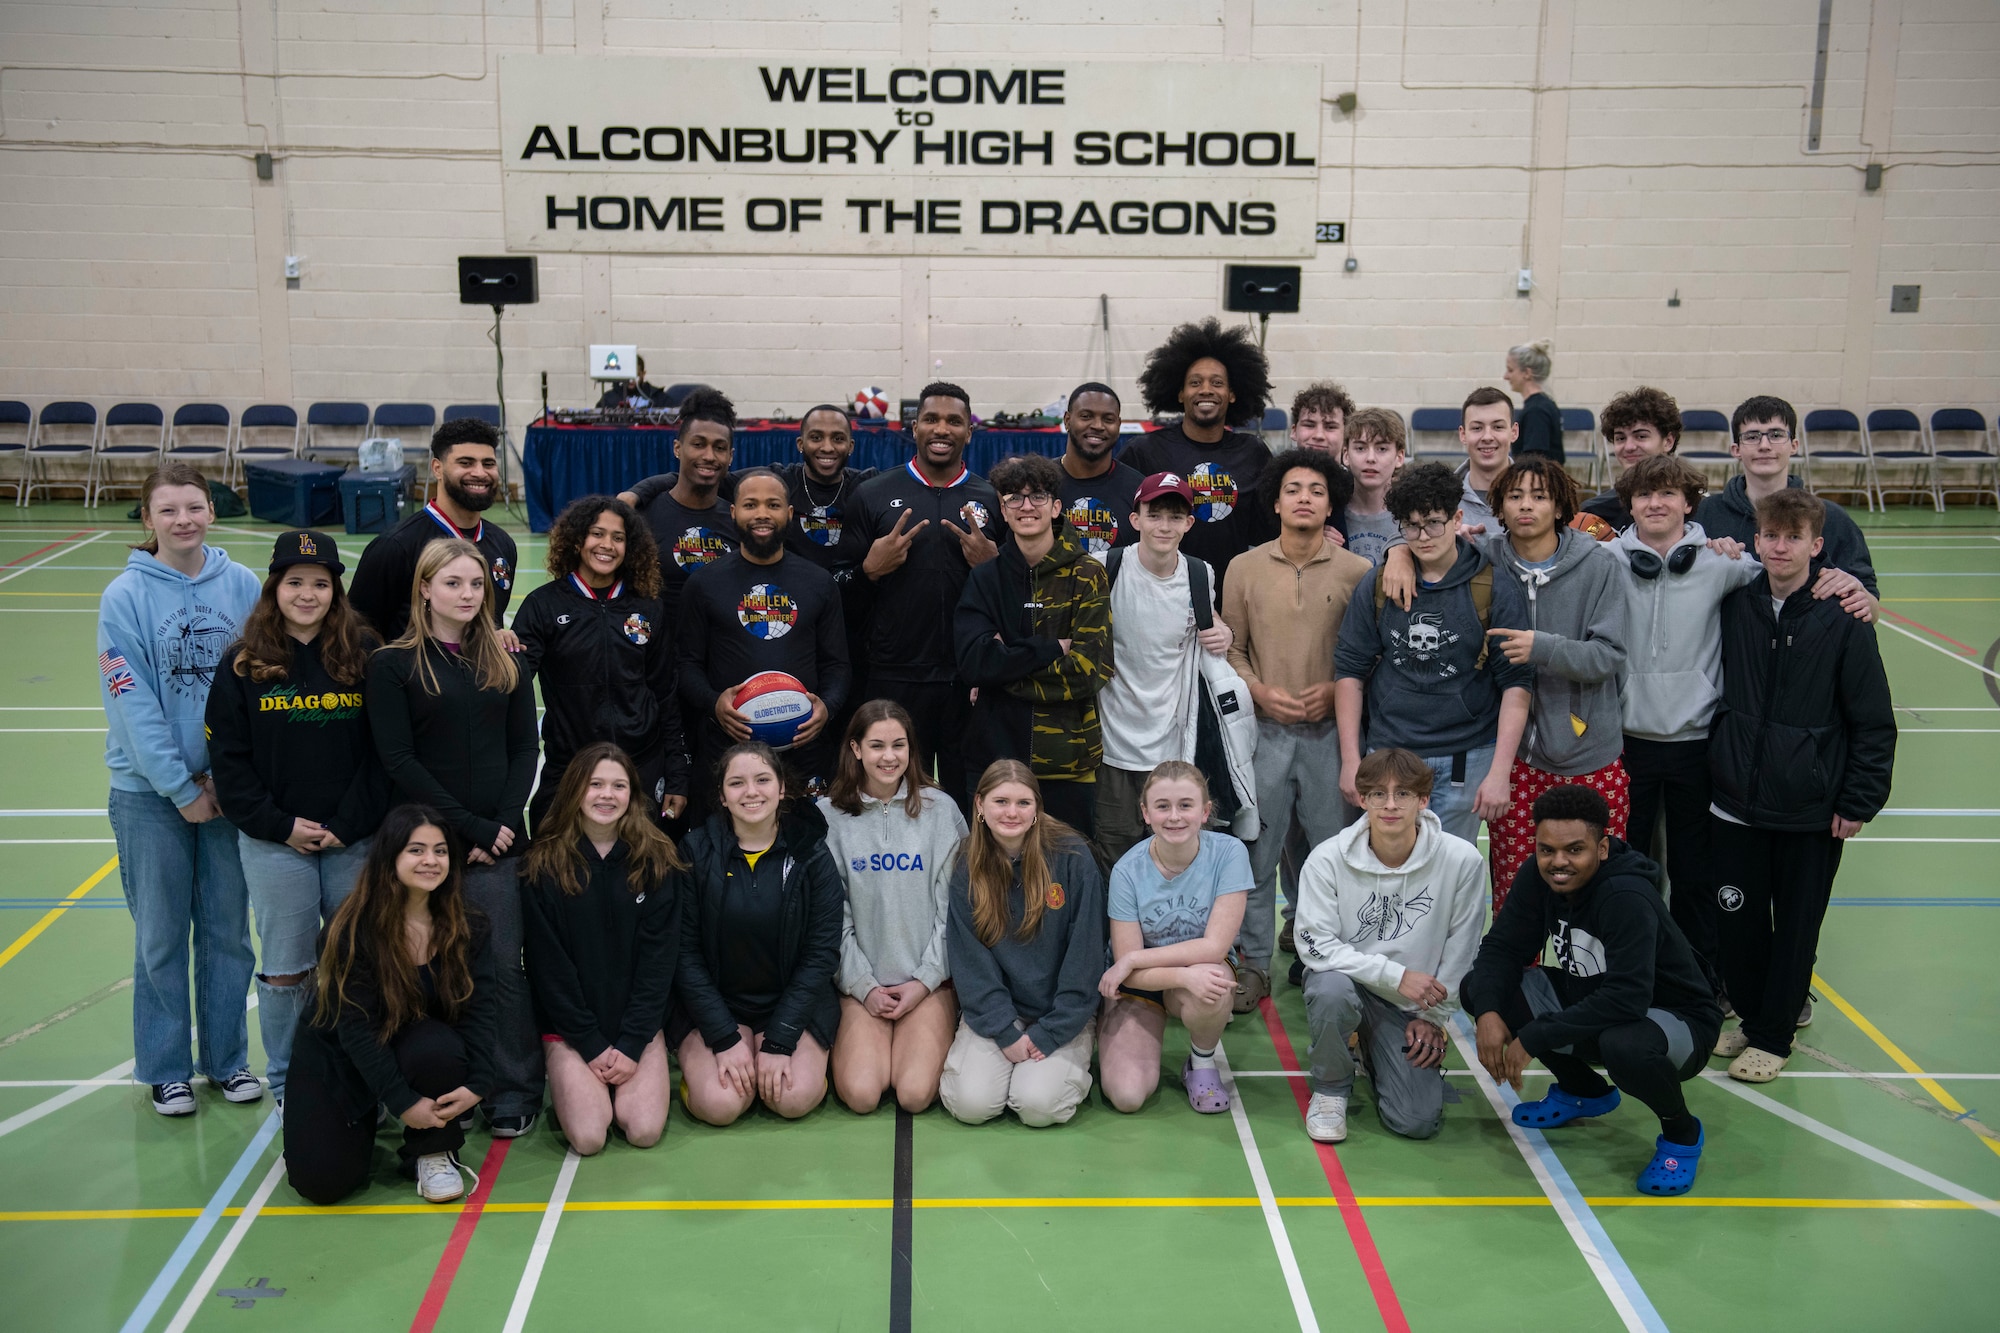 The Harlem Globetrotters pose for a photo with basketball players from RAF Alconbury Middle High School at RAF Alconbury